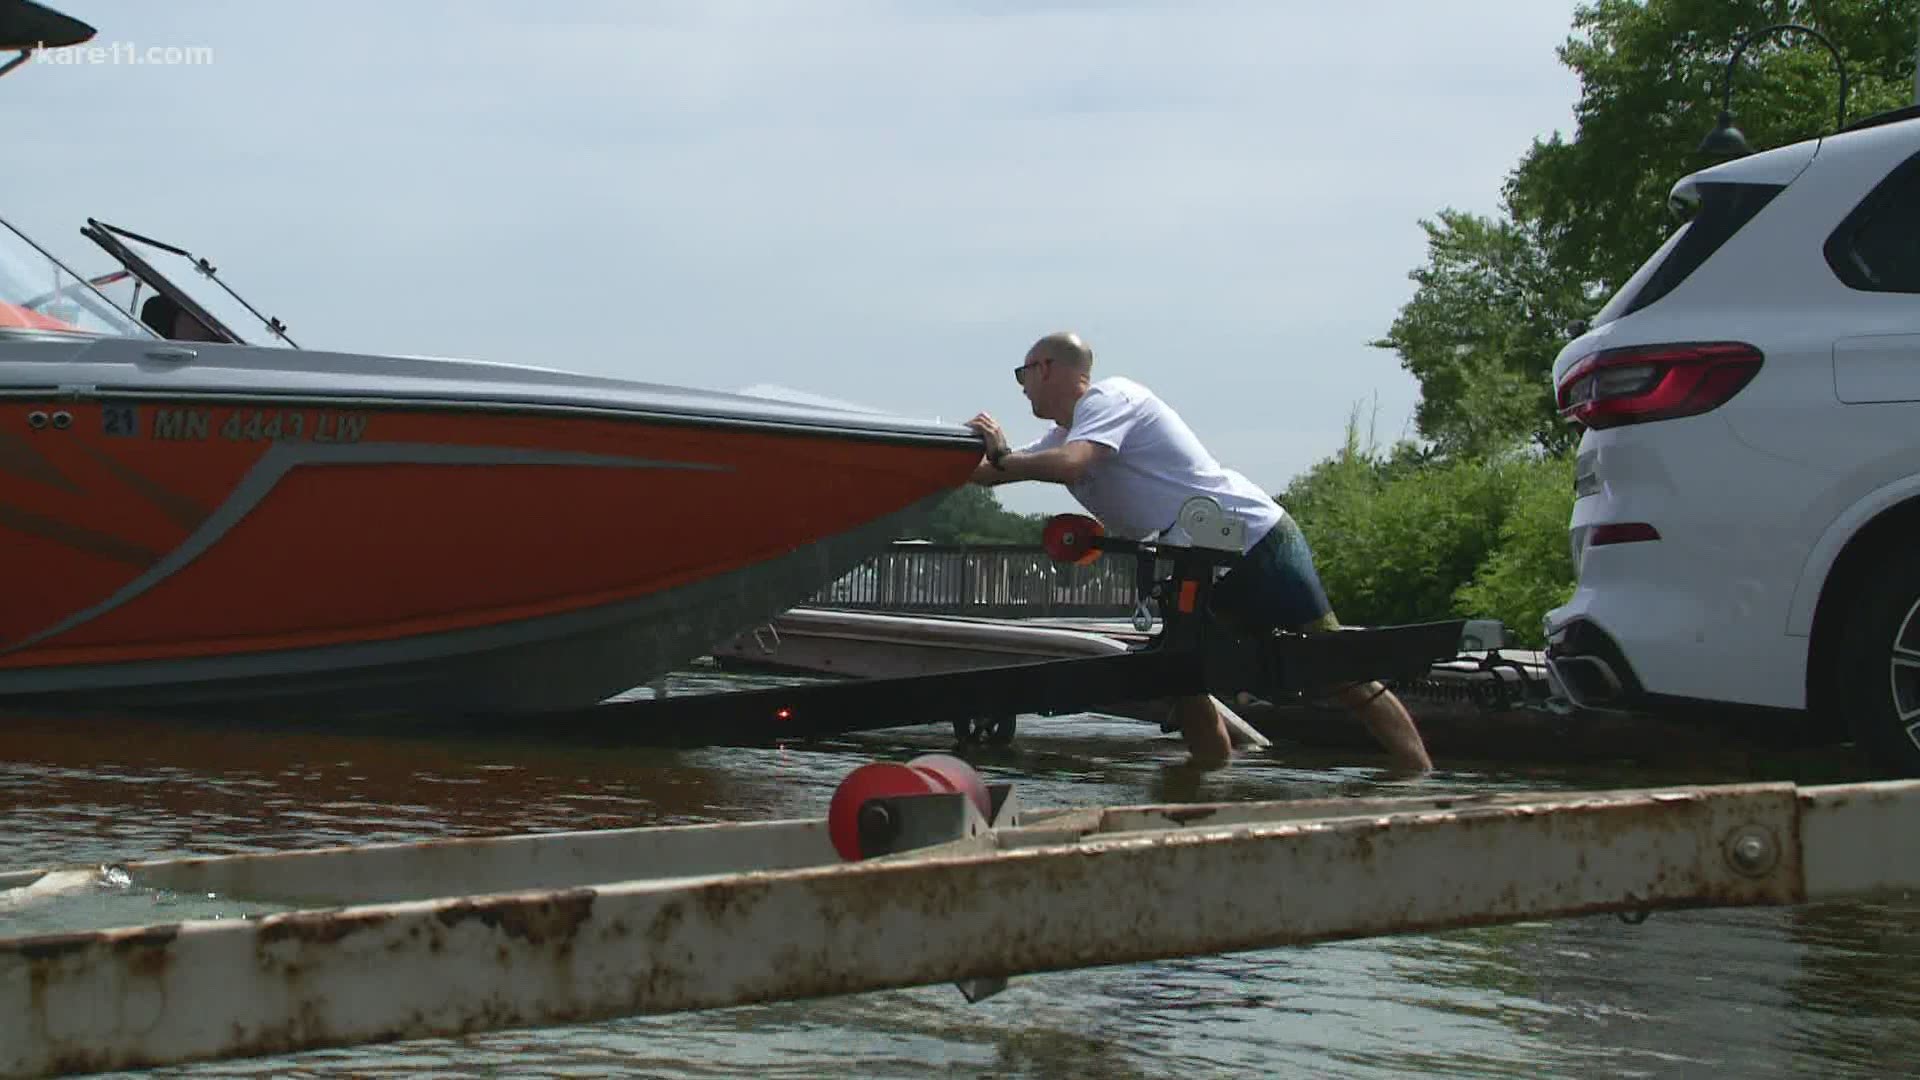 When it comes to social distancing, DNR conservation officers say they can't do much other than remind boaters about public health guidance